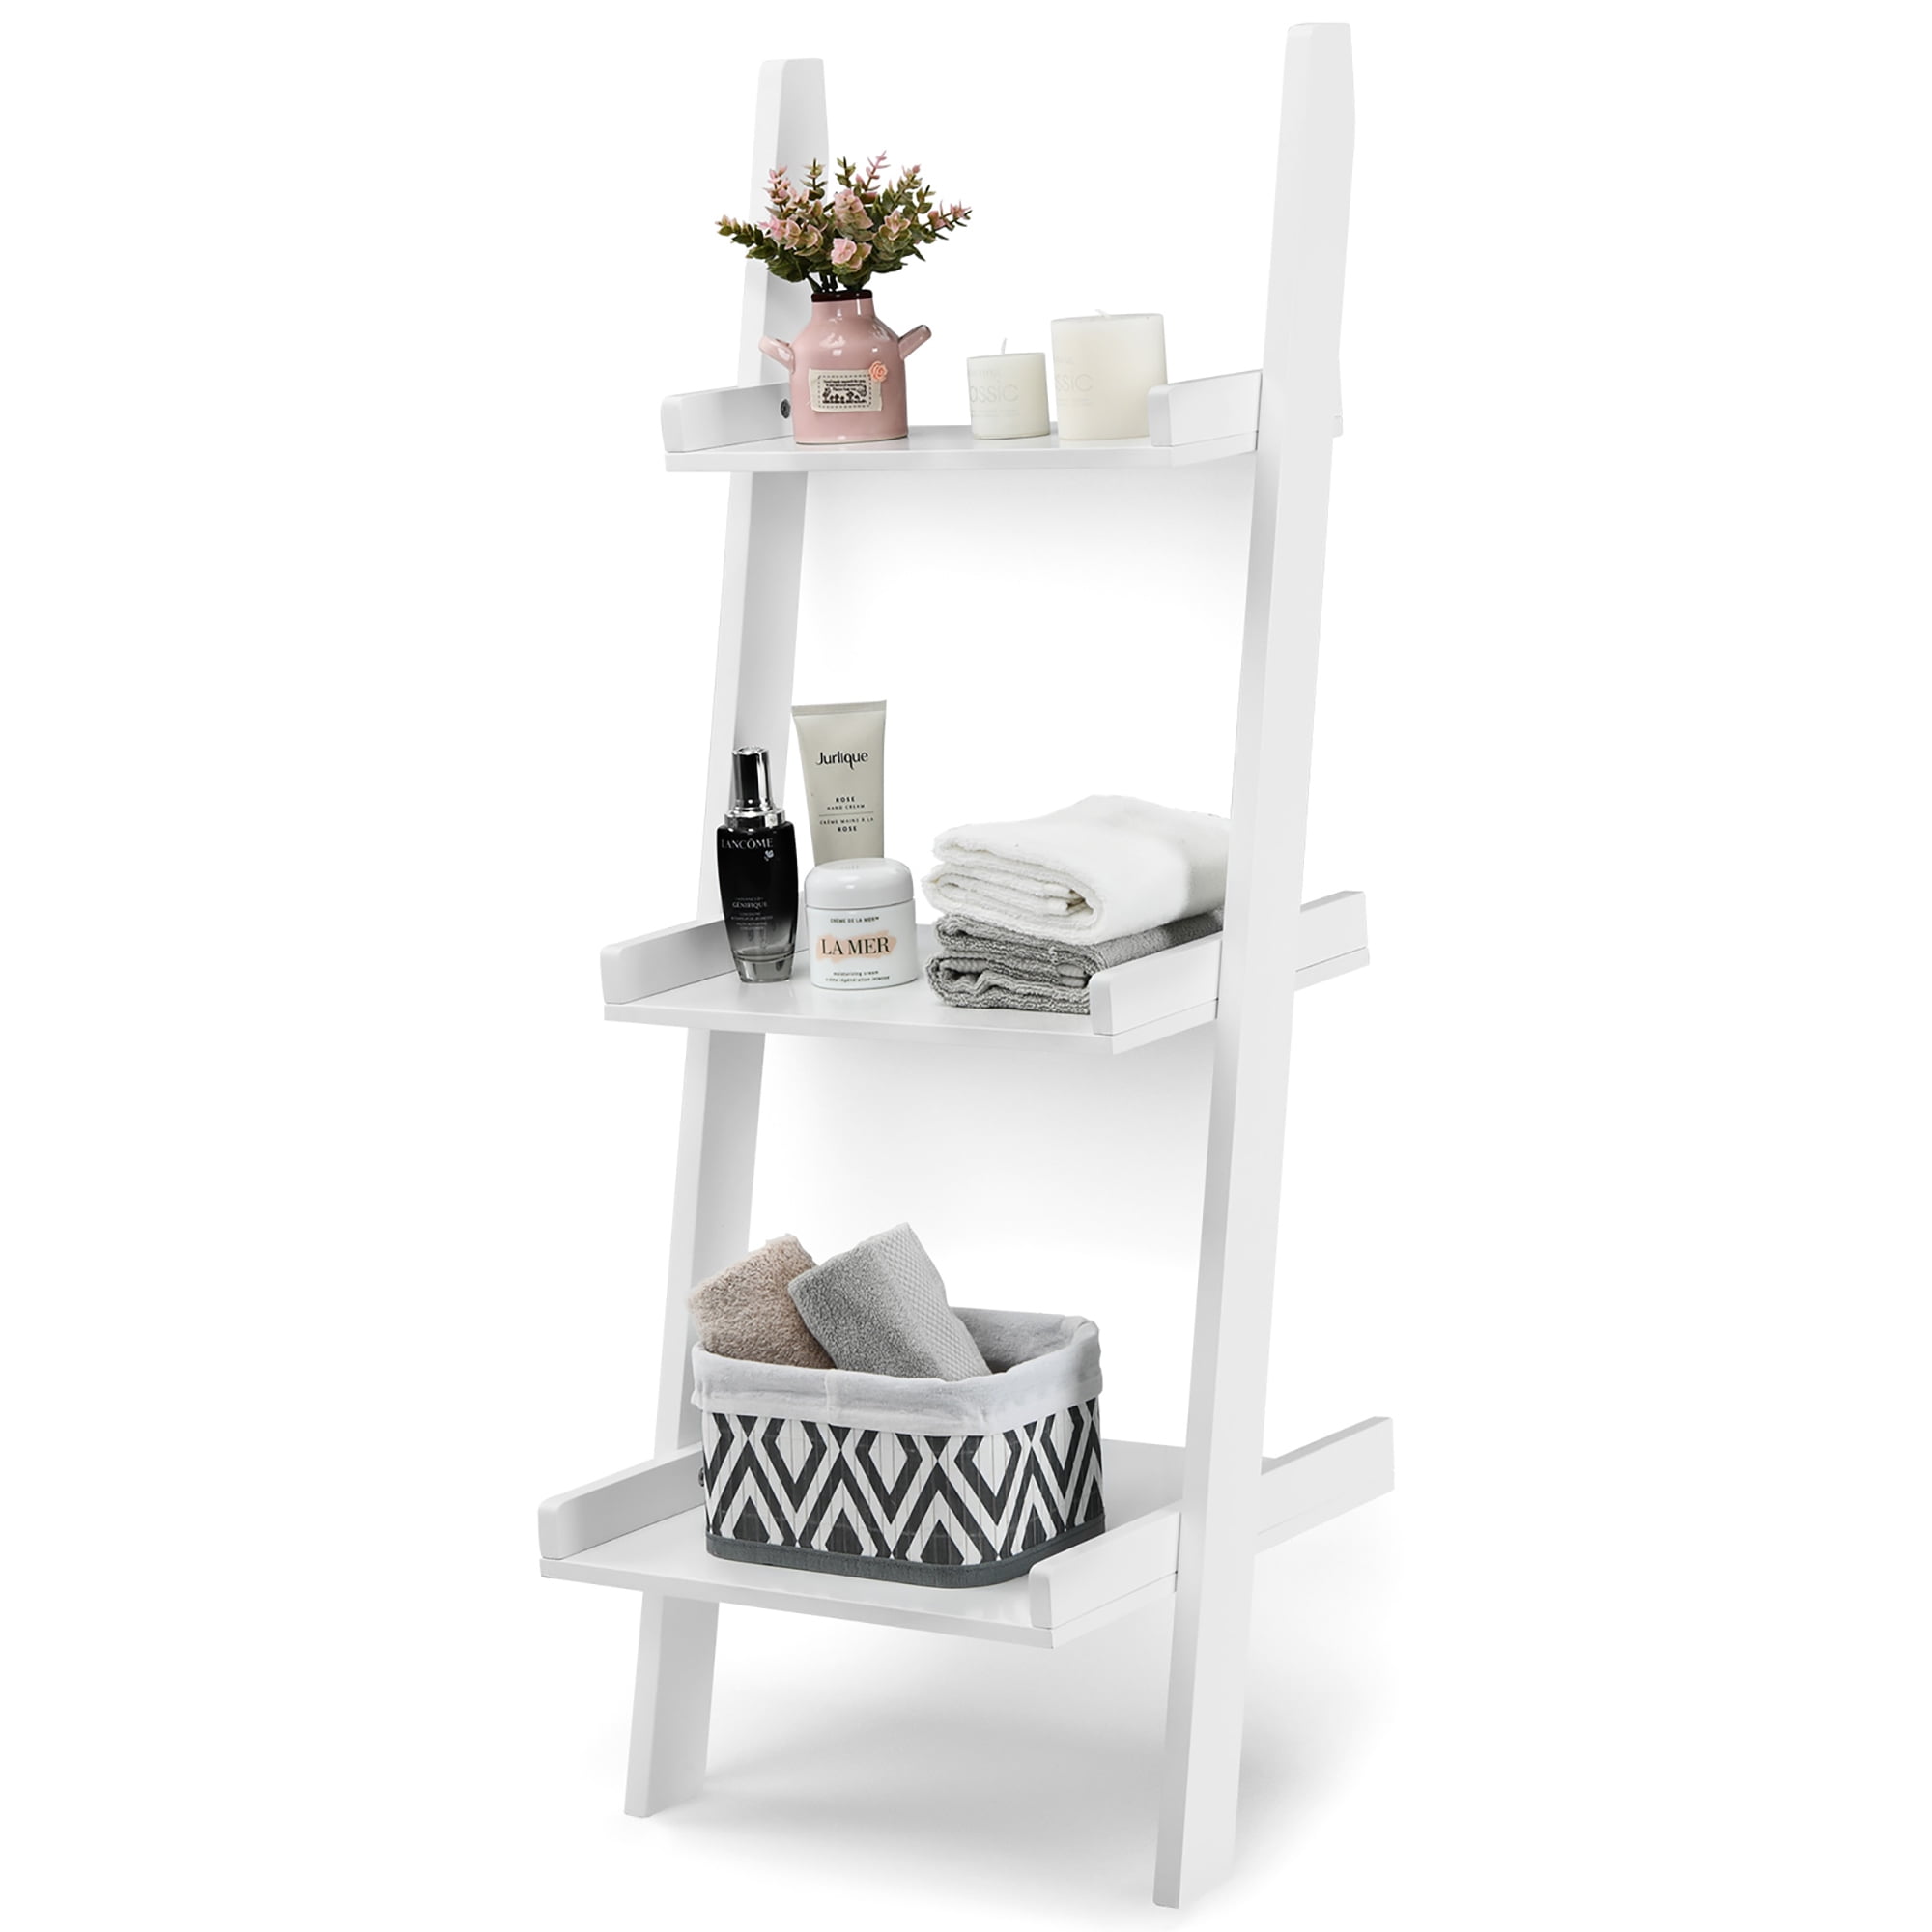 Costway 3 Tier Leaning Wall Ladder Book, 5 Tier Leaning Wall Bookcase Shelf In White